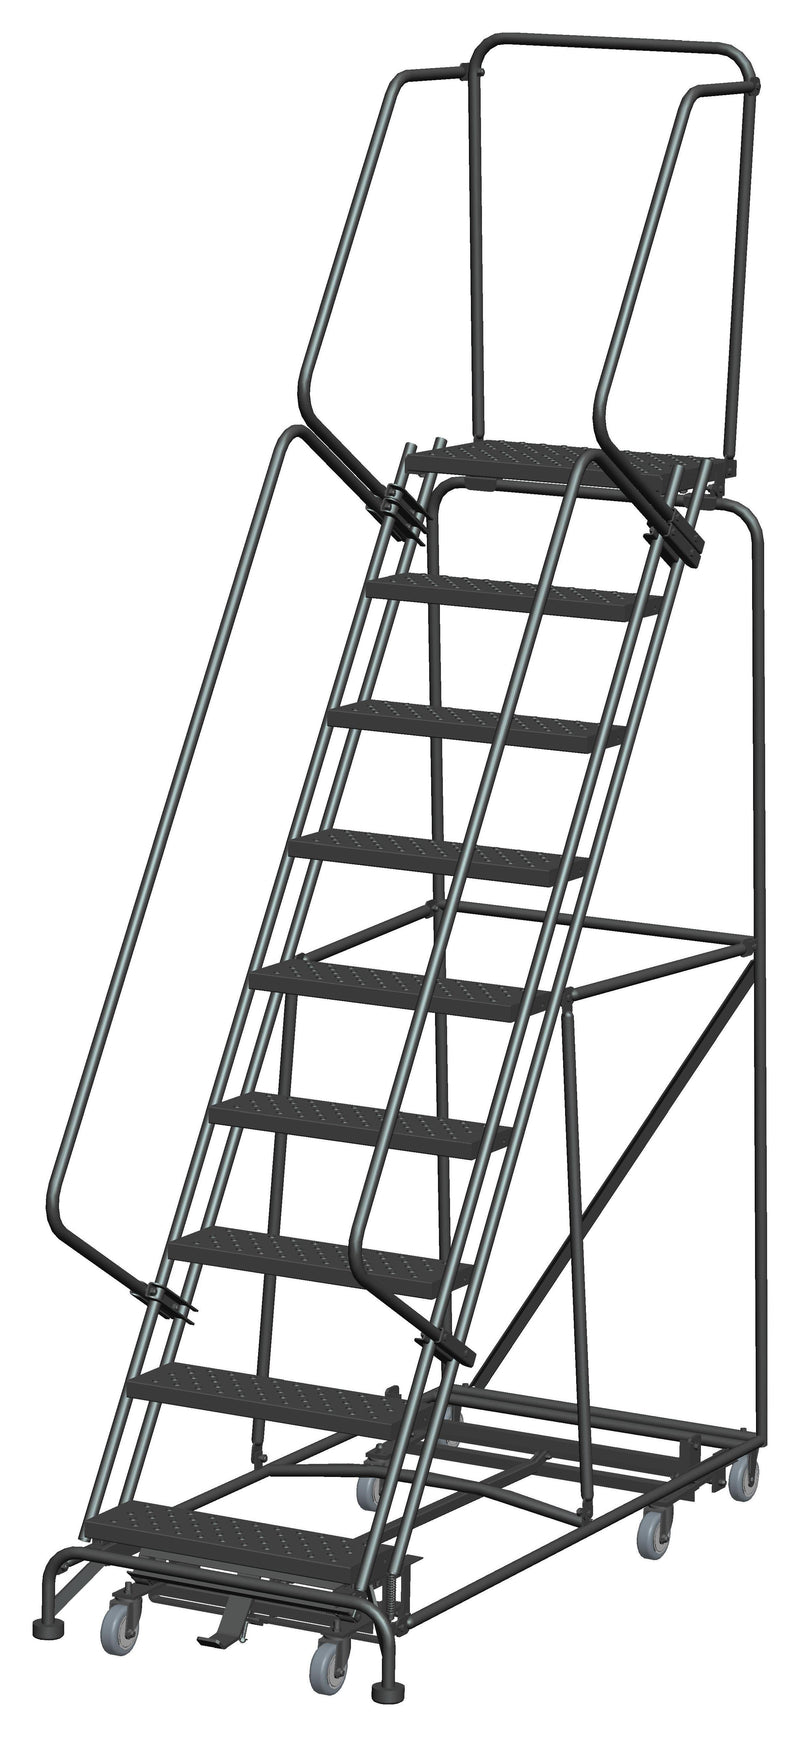 Rolling Ladder - Weight-Actuated, All Direction - 9 Step, Handrails - Ballymore